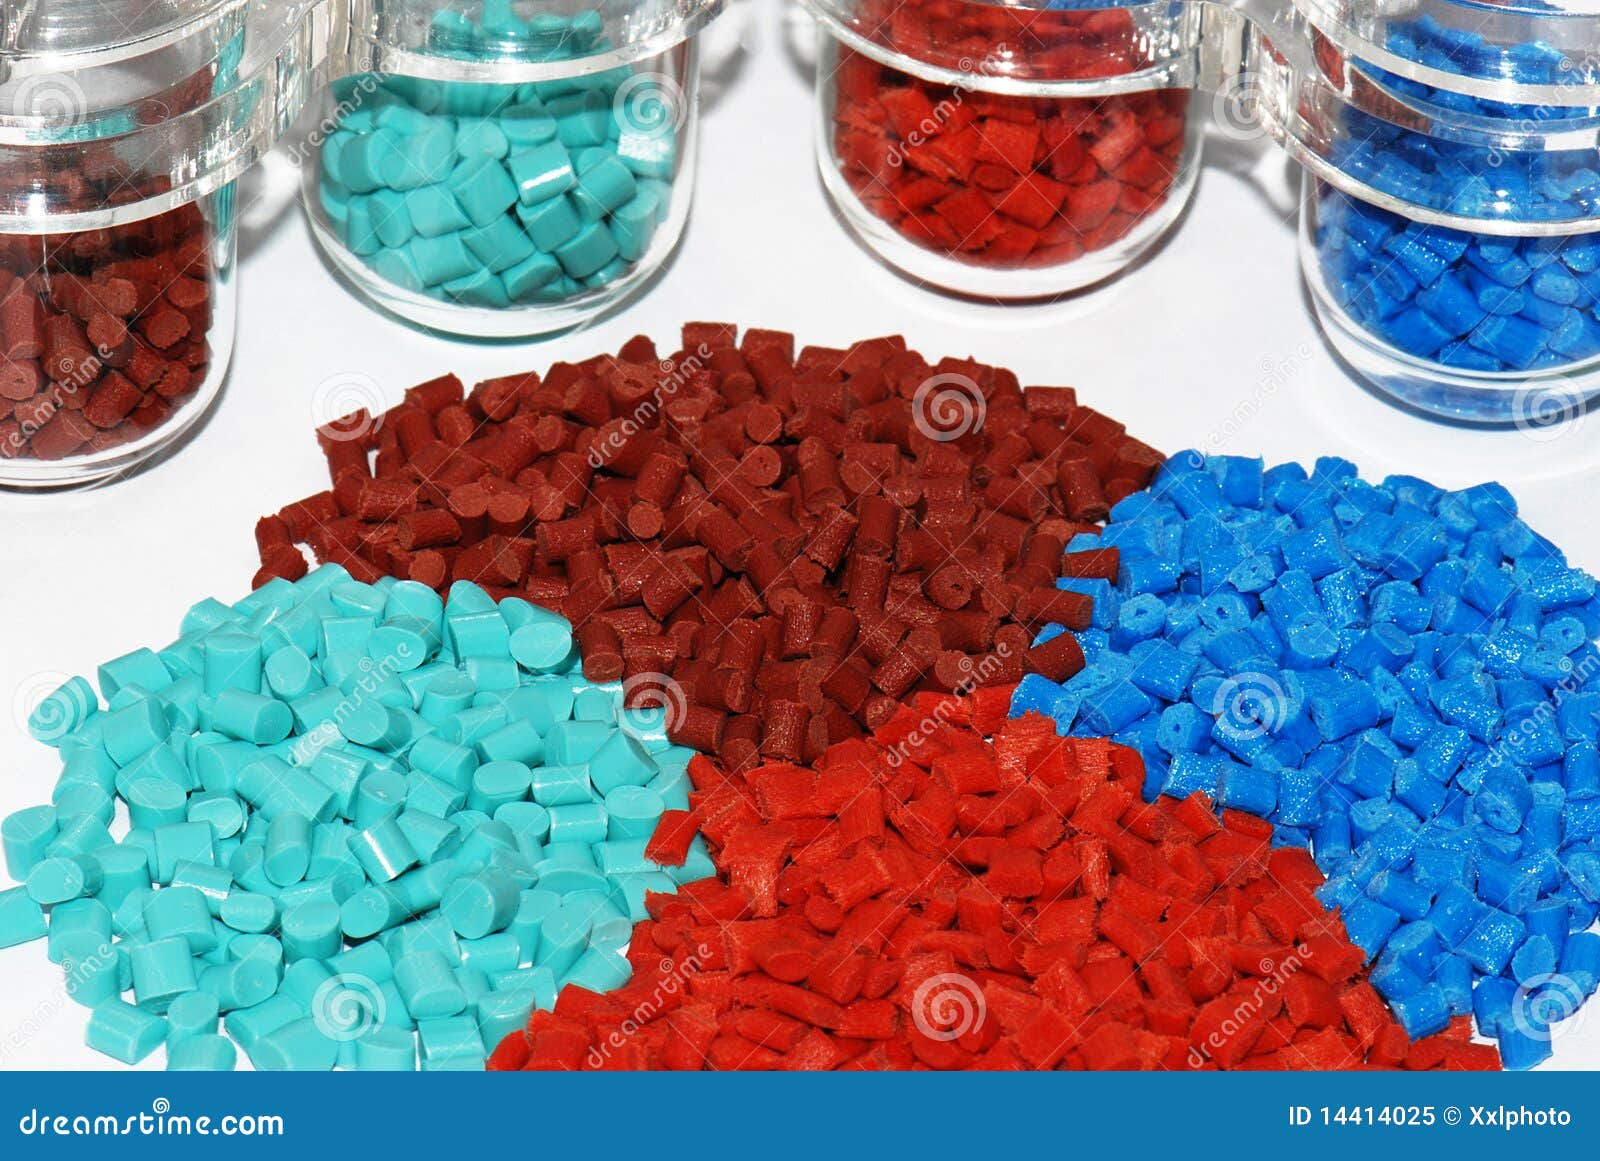 dyed plastic granulate in test glasses